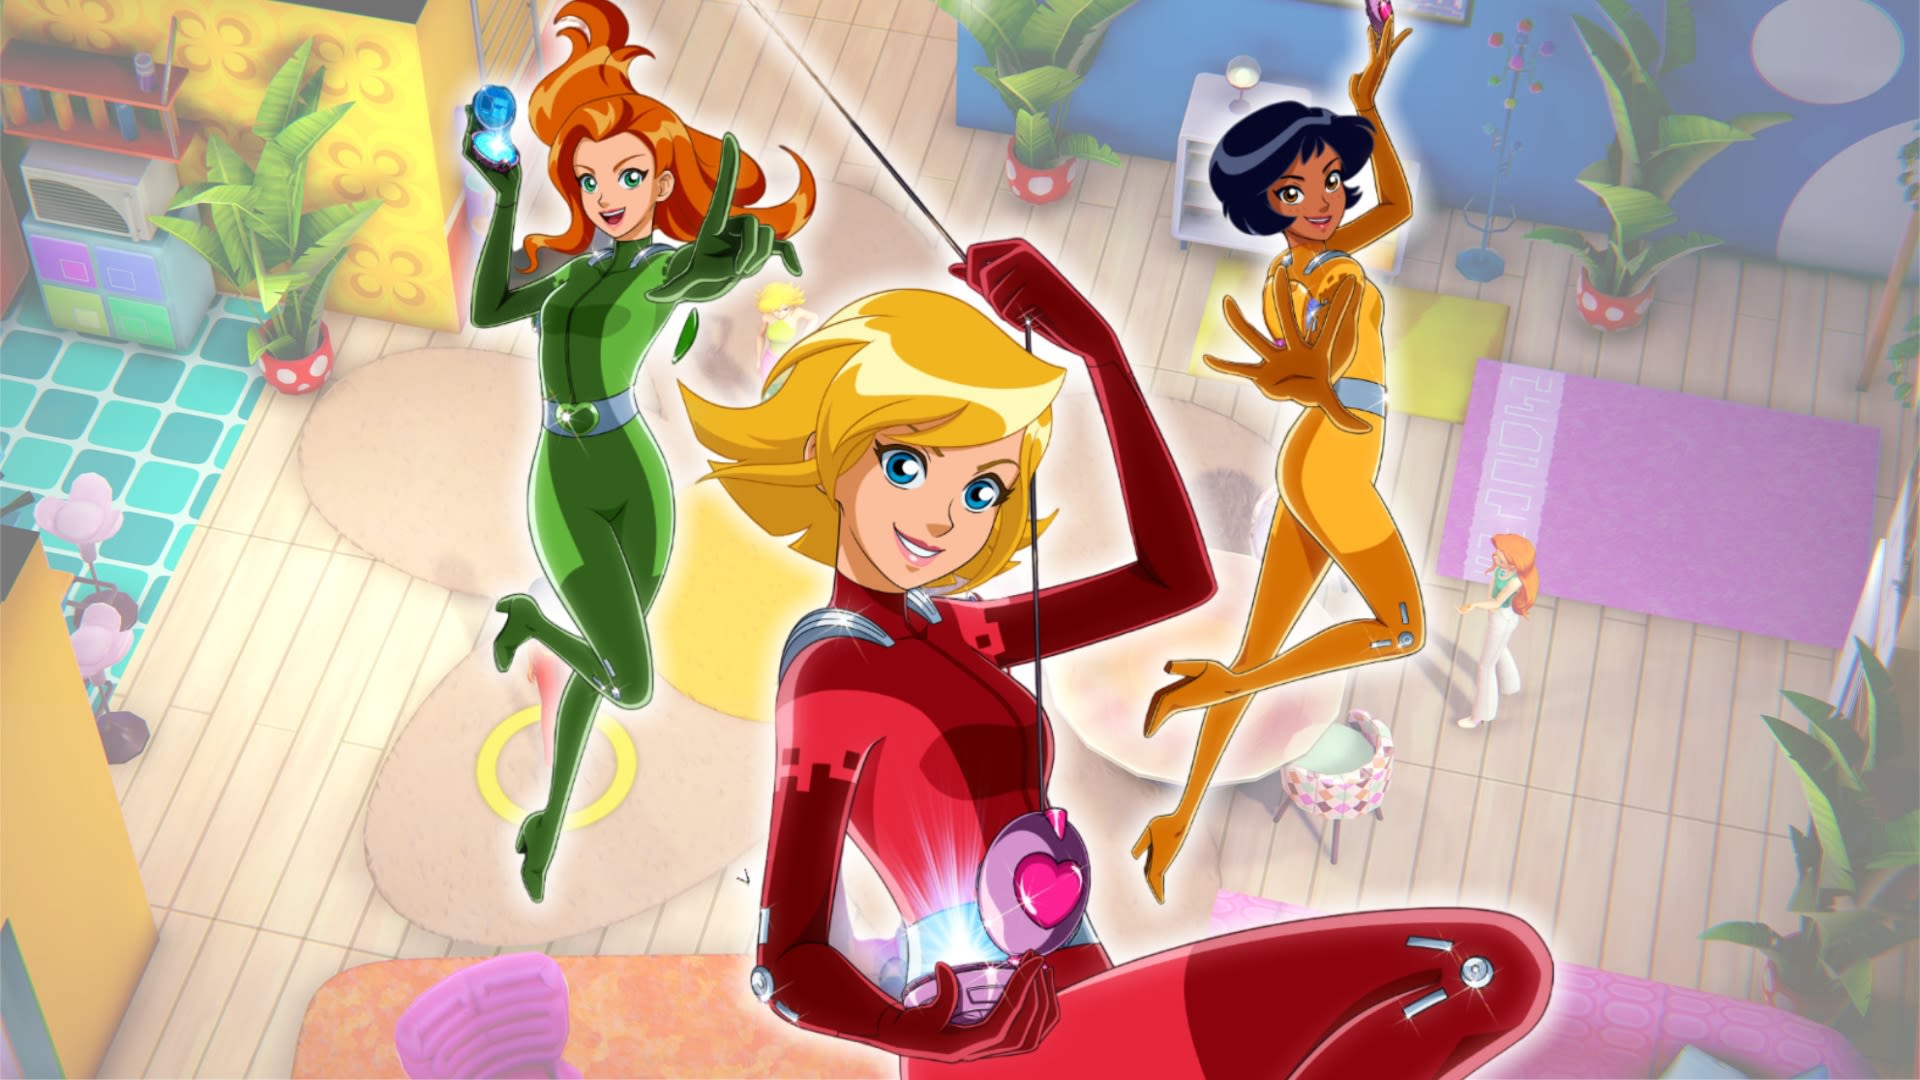 Totally Spies! Cyber Mission allows you to join Clover, Alex, and Sam on a top secret mission in Singapore